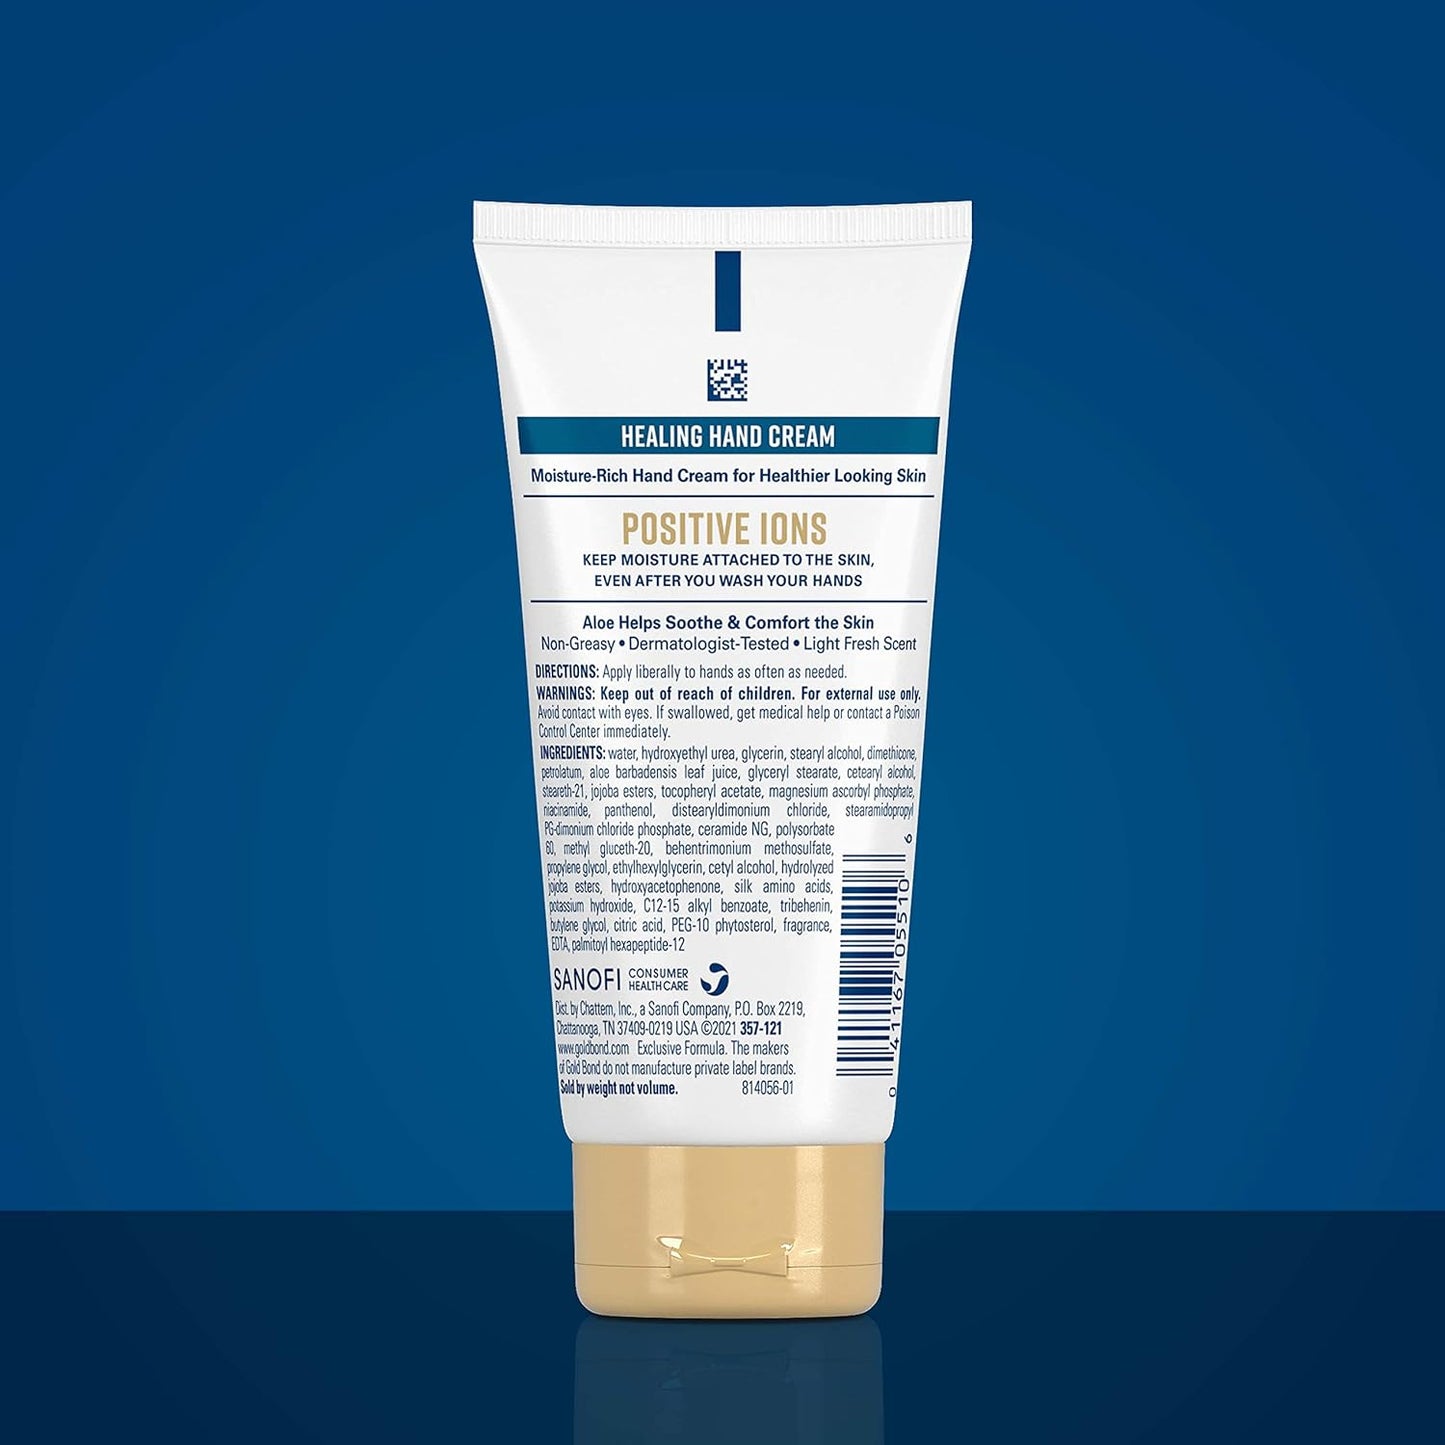 Gold Bond Healing Hand Cream, 3 oz., Enriched with Aloe for Long-lasting Moisture Even After Handwashing